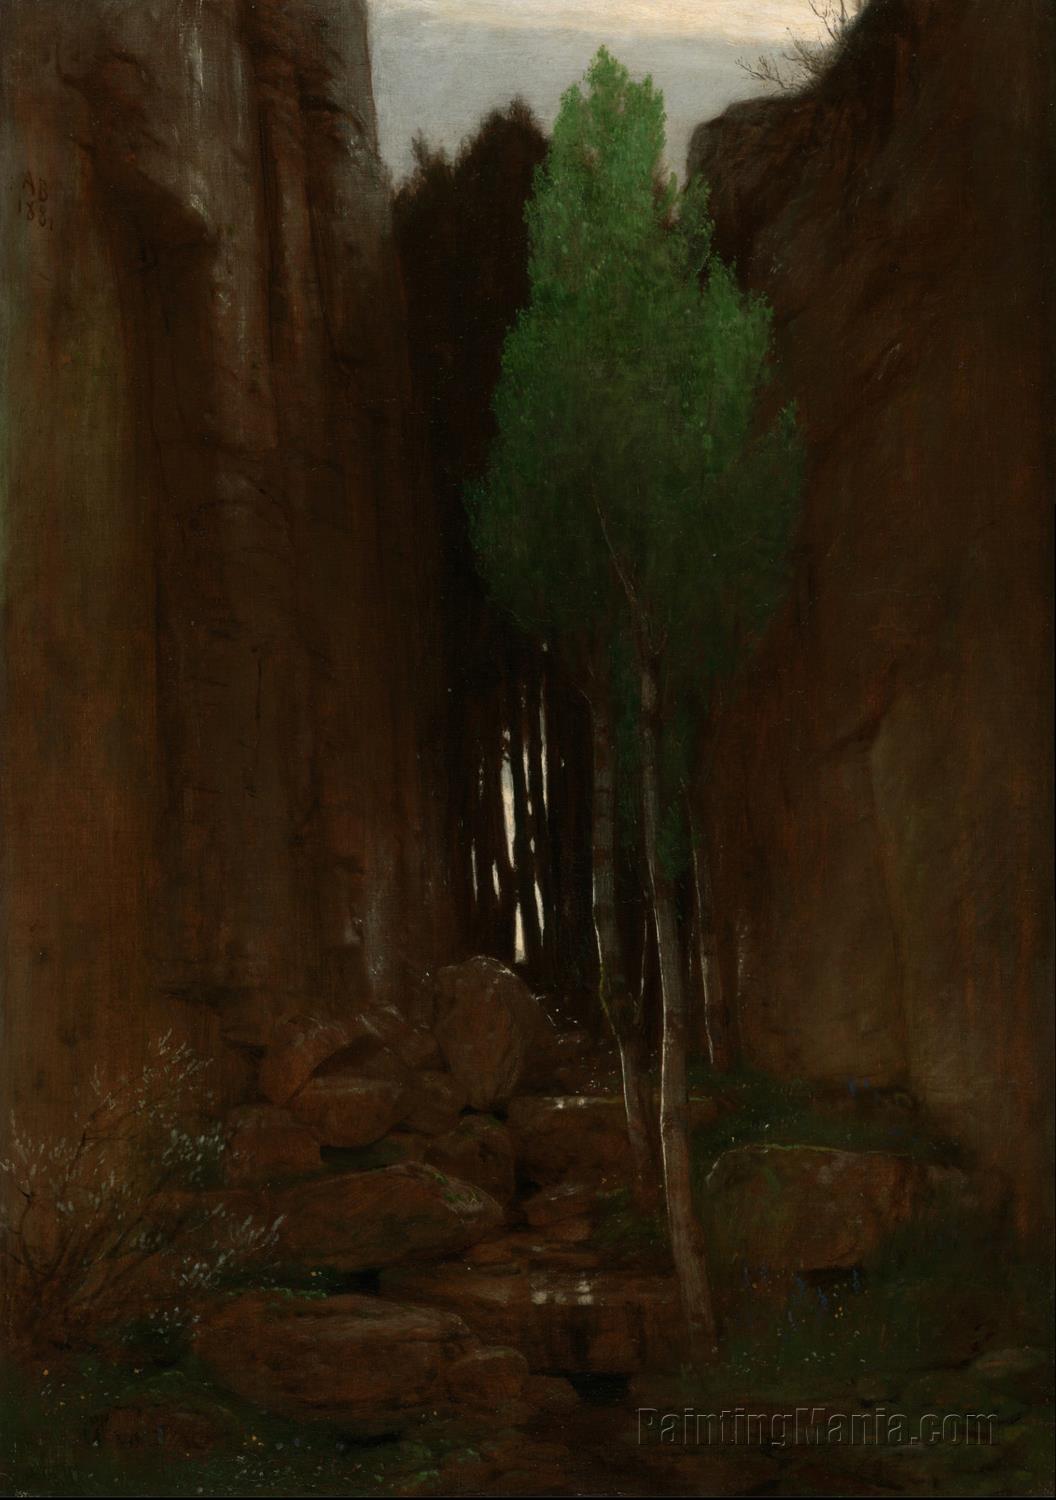 Spring in a Narrow Gorge